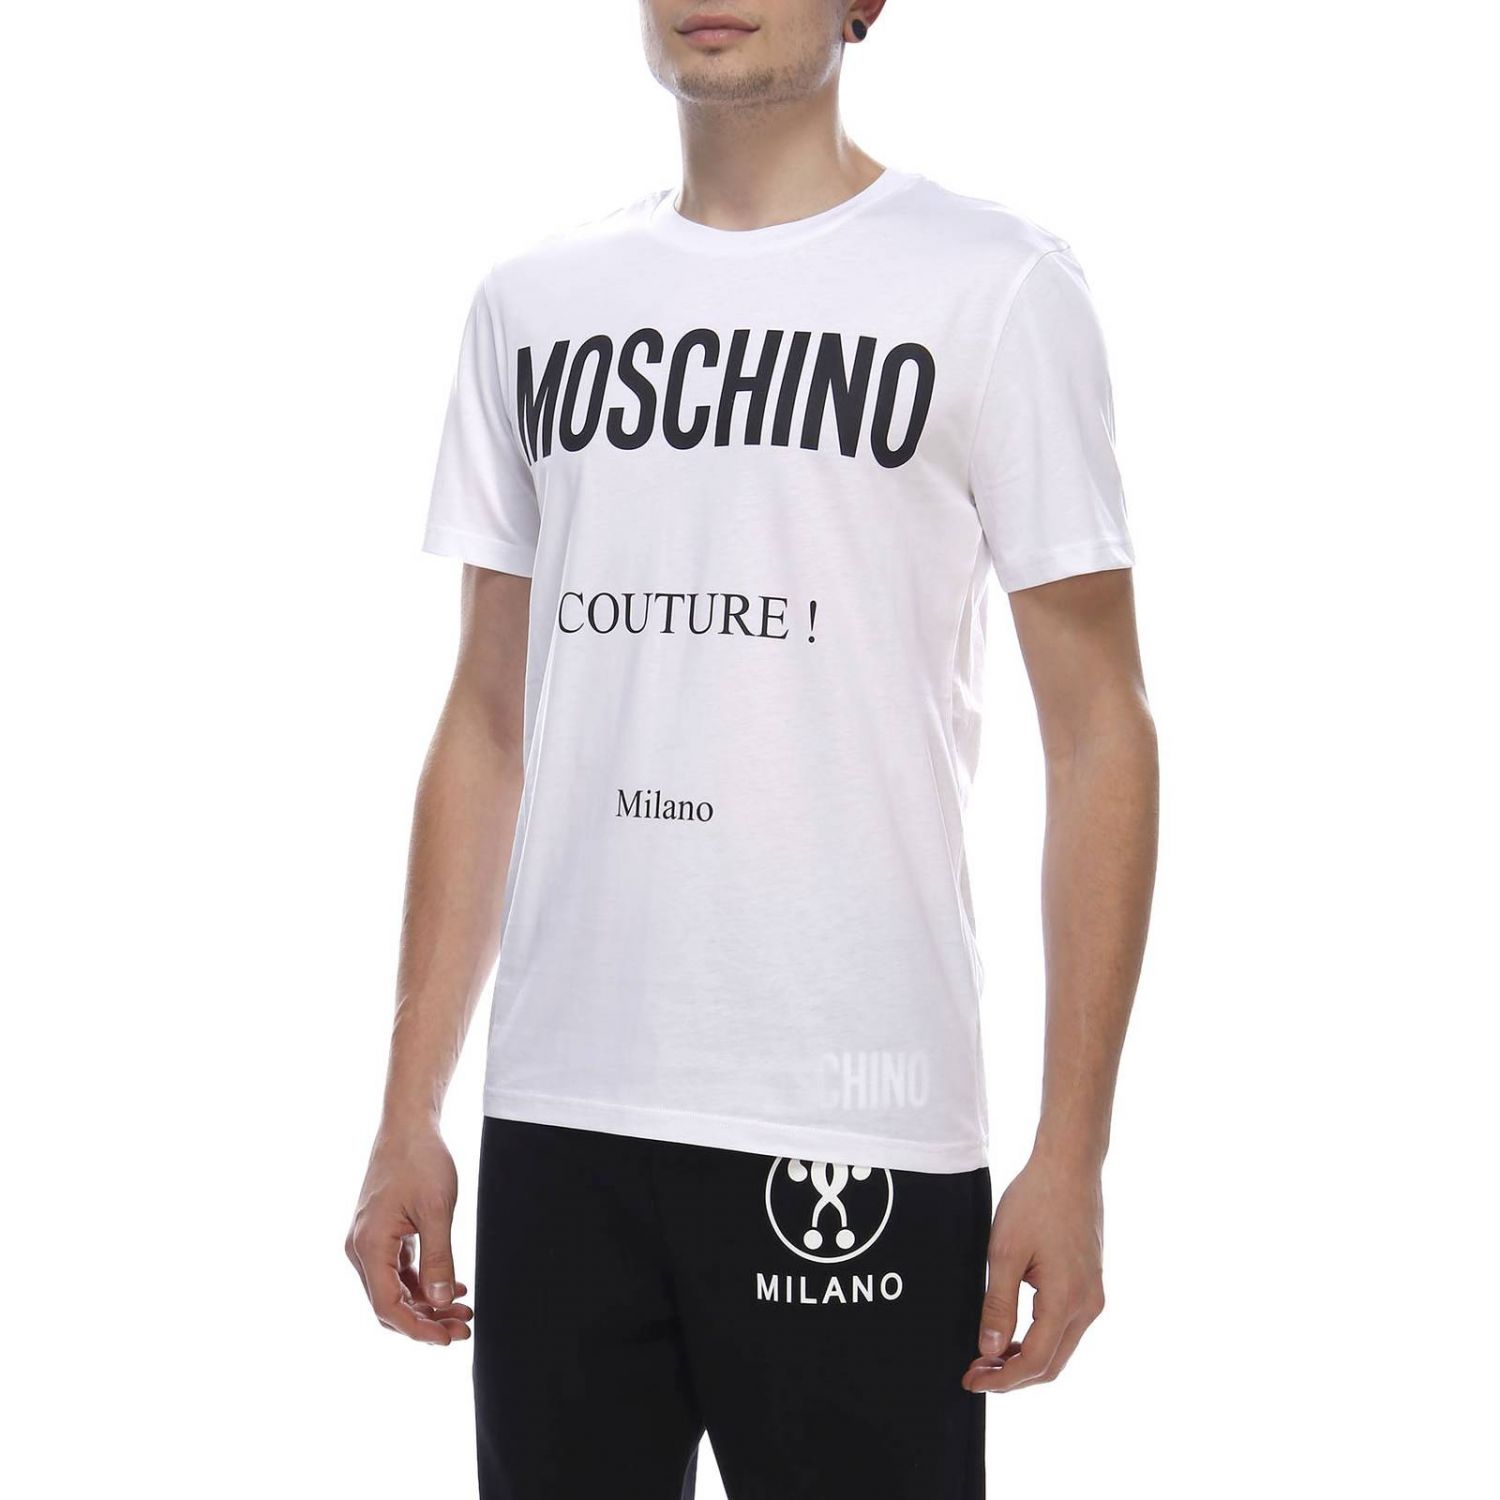 Moschino Couture Outlet: T-shirt men - White | T-Shirt Moschino Couture ...